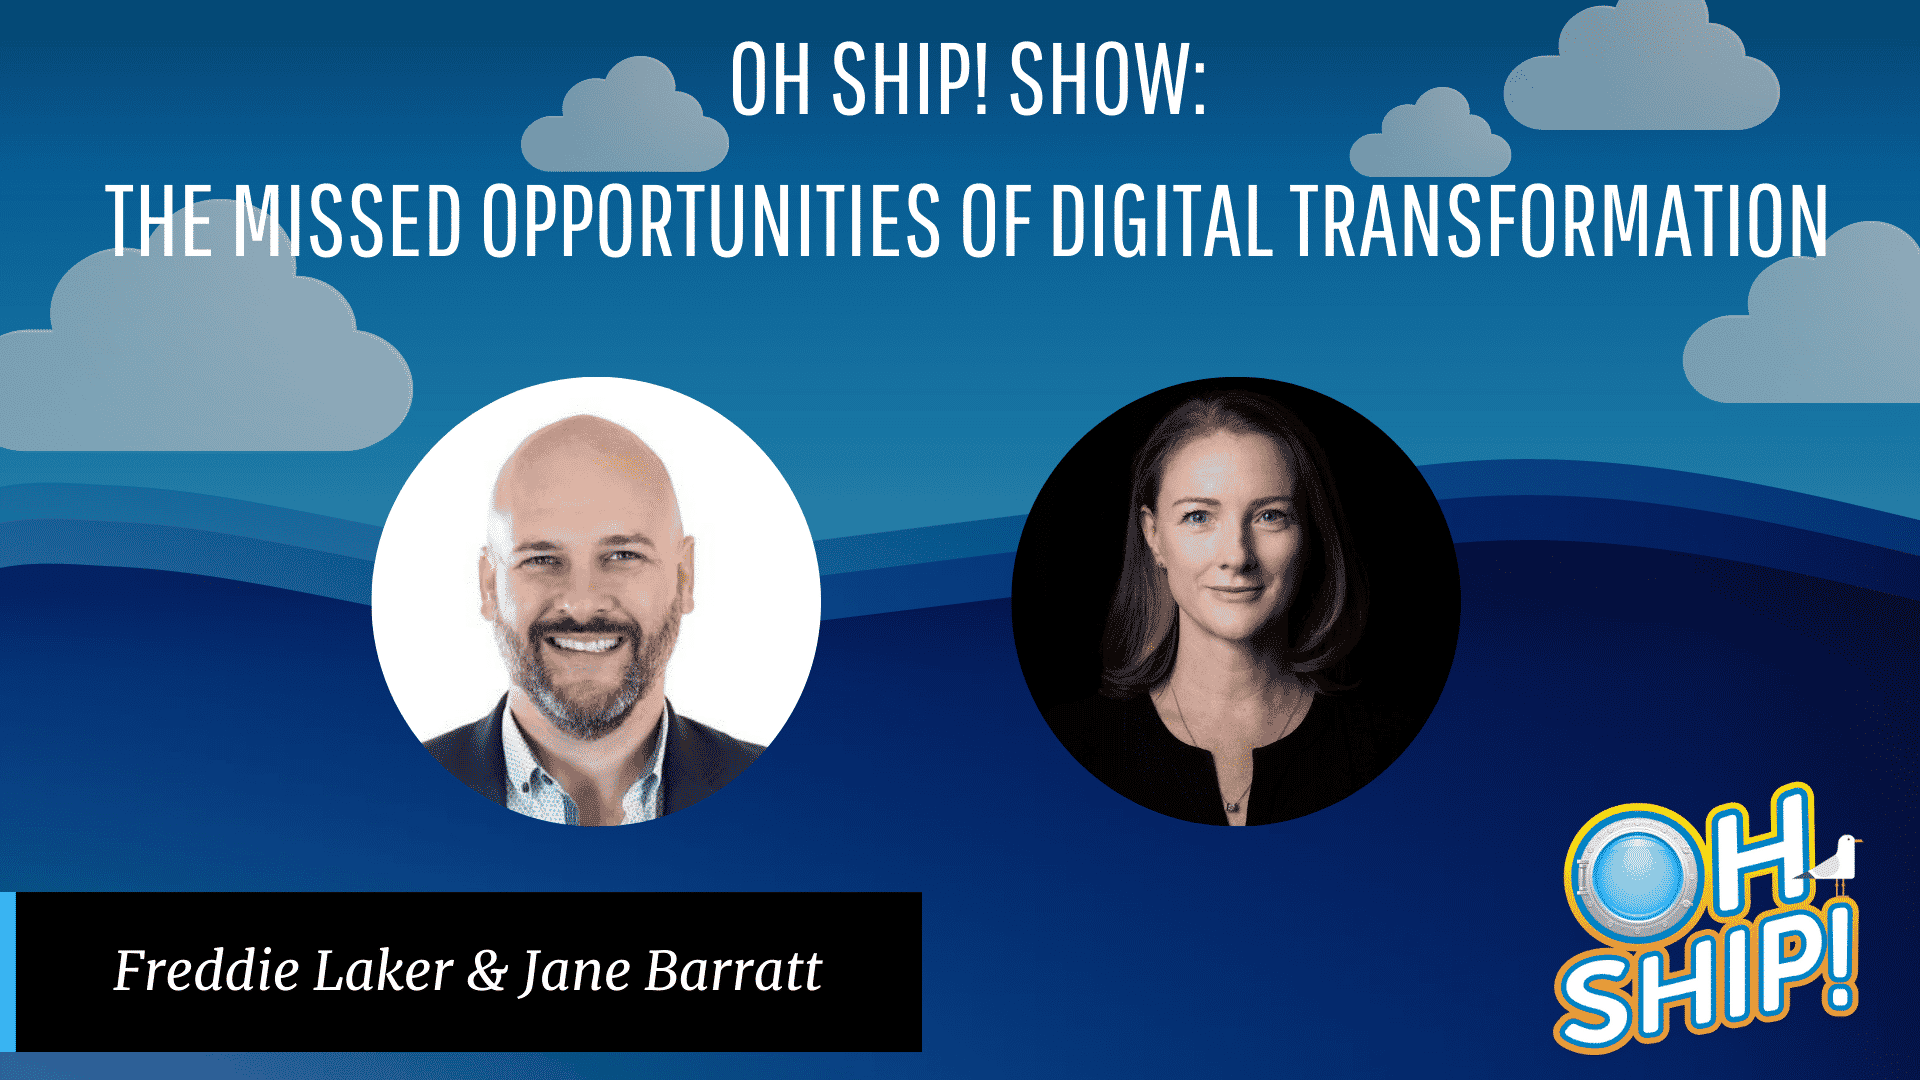 A promotional graphic for the "OH SHIP! SHOW" titled "The Missed Opportunities of Digital Transformation." It features headshots of Freddie Laker (left) and Jane Barratt (right) against a blue background with clouds. The text "Oh Ship!" is at the bottom right.